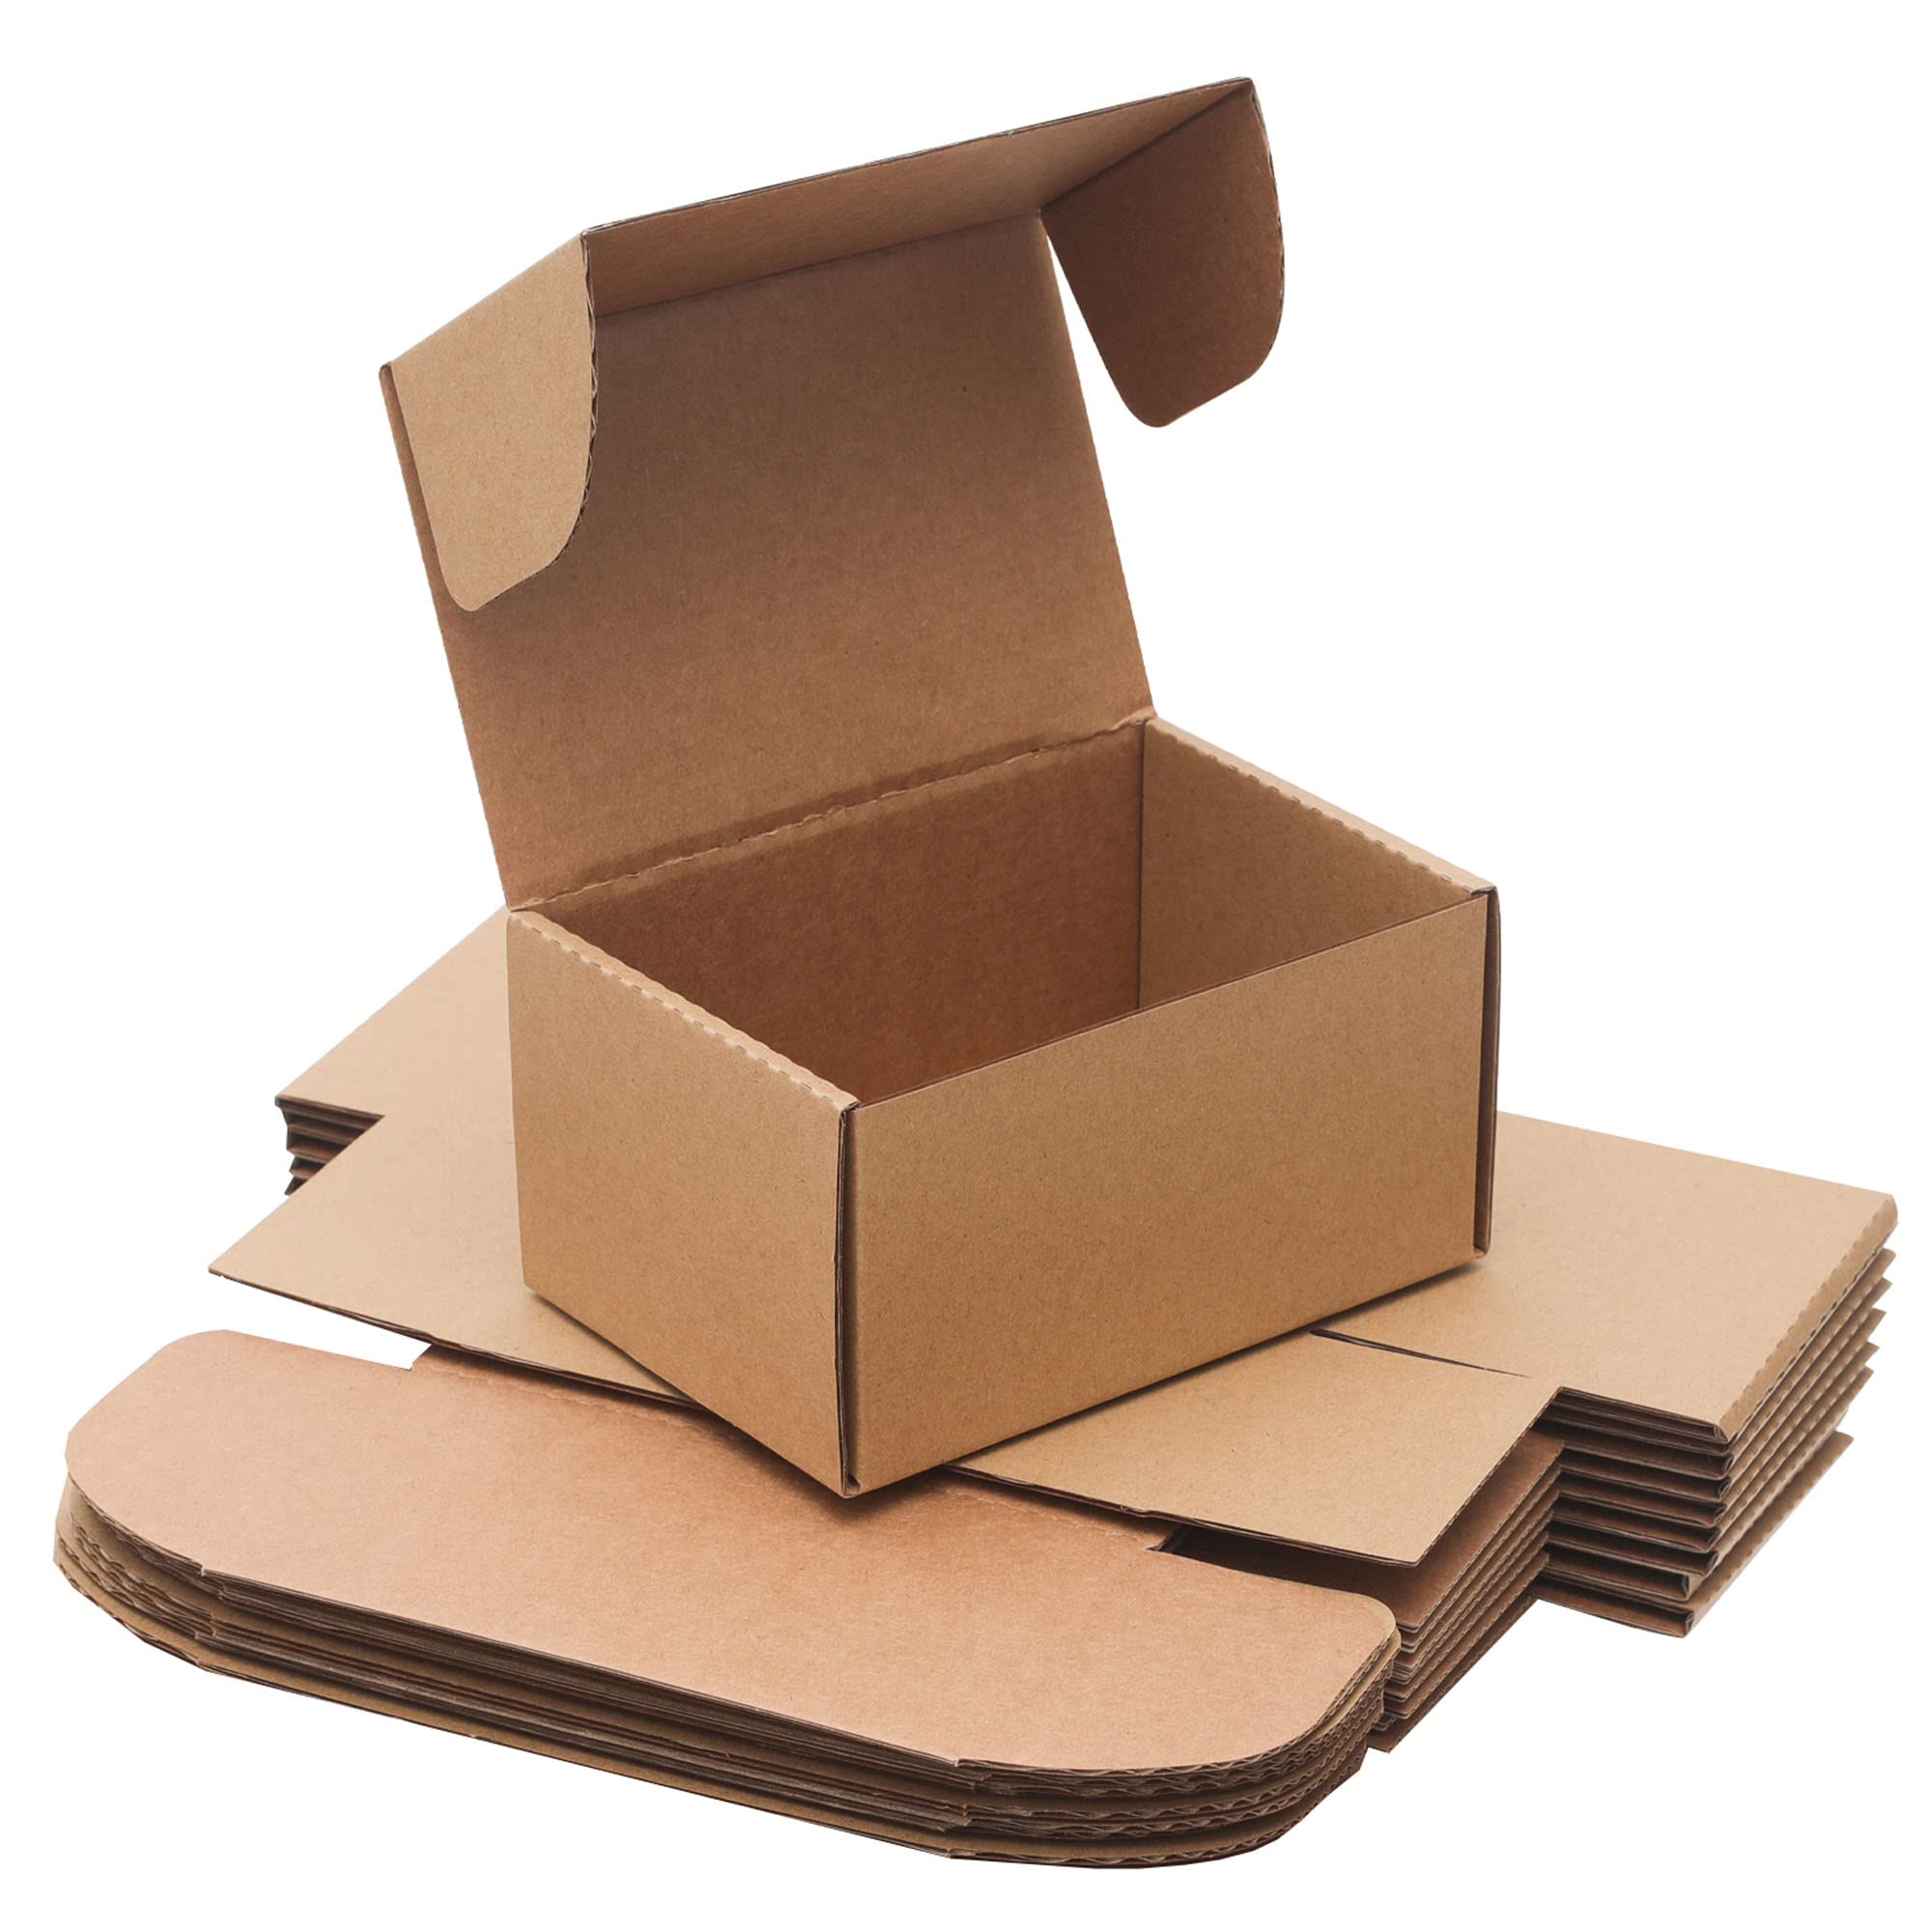 carboard mailer boxes